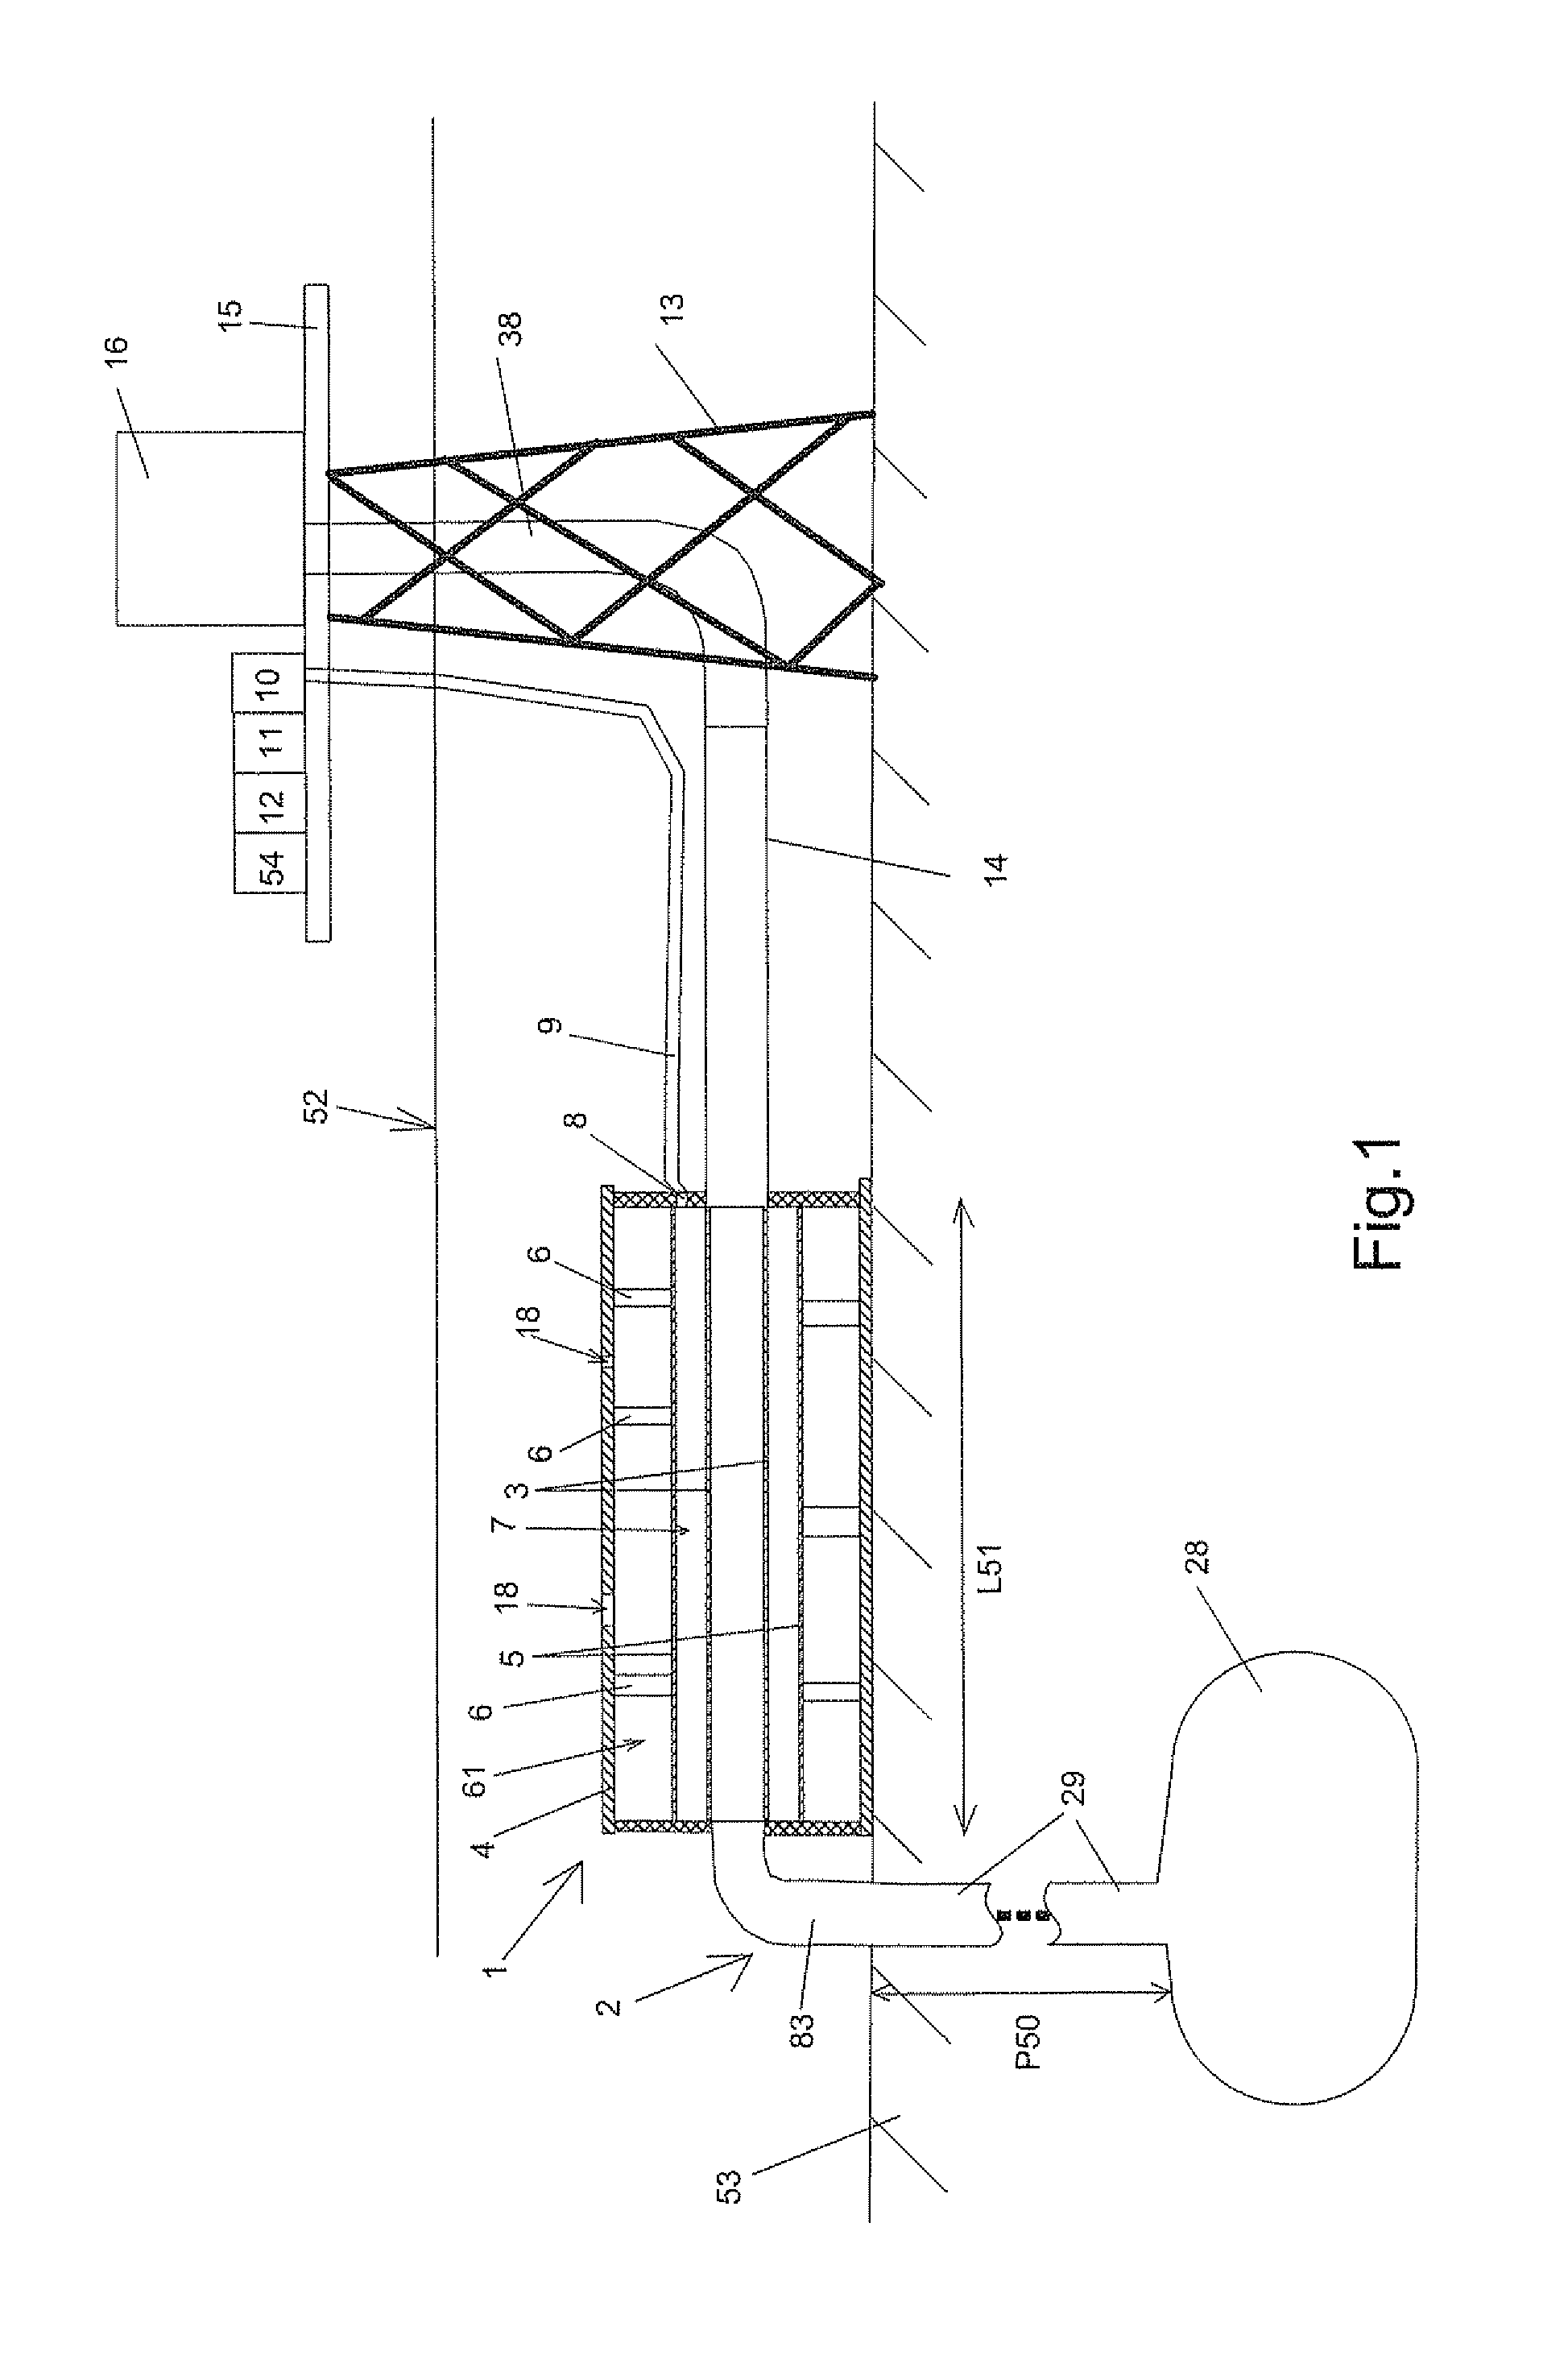 Underwater hydrocarbon transport and temperature control device